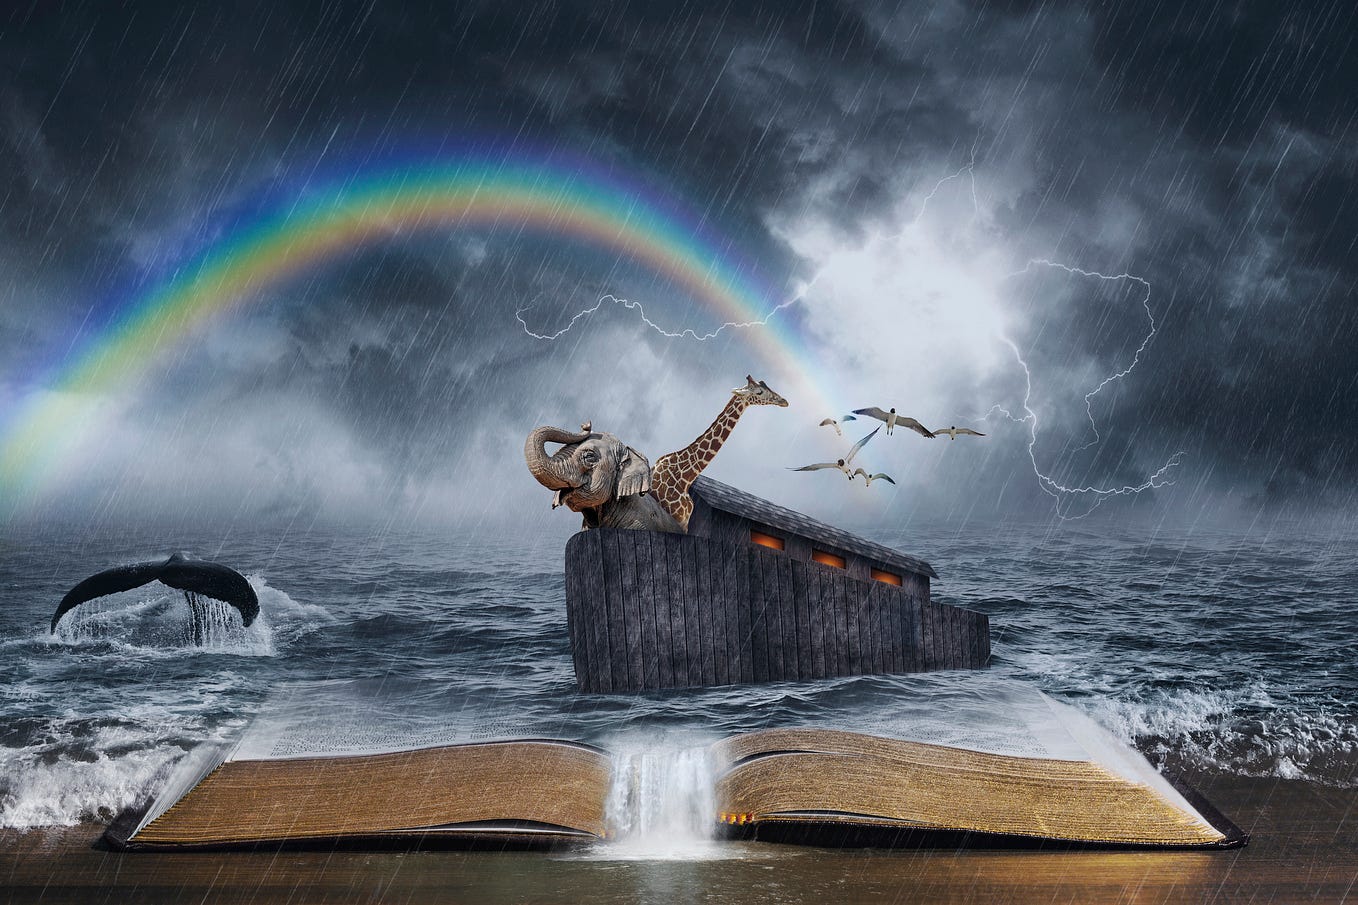 Navigating the Storm: Noah’s Ark and the Human Condition